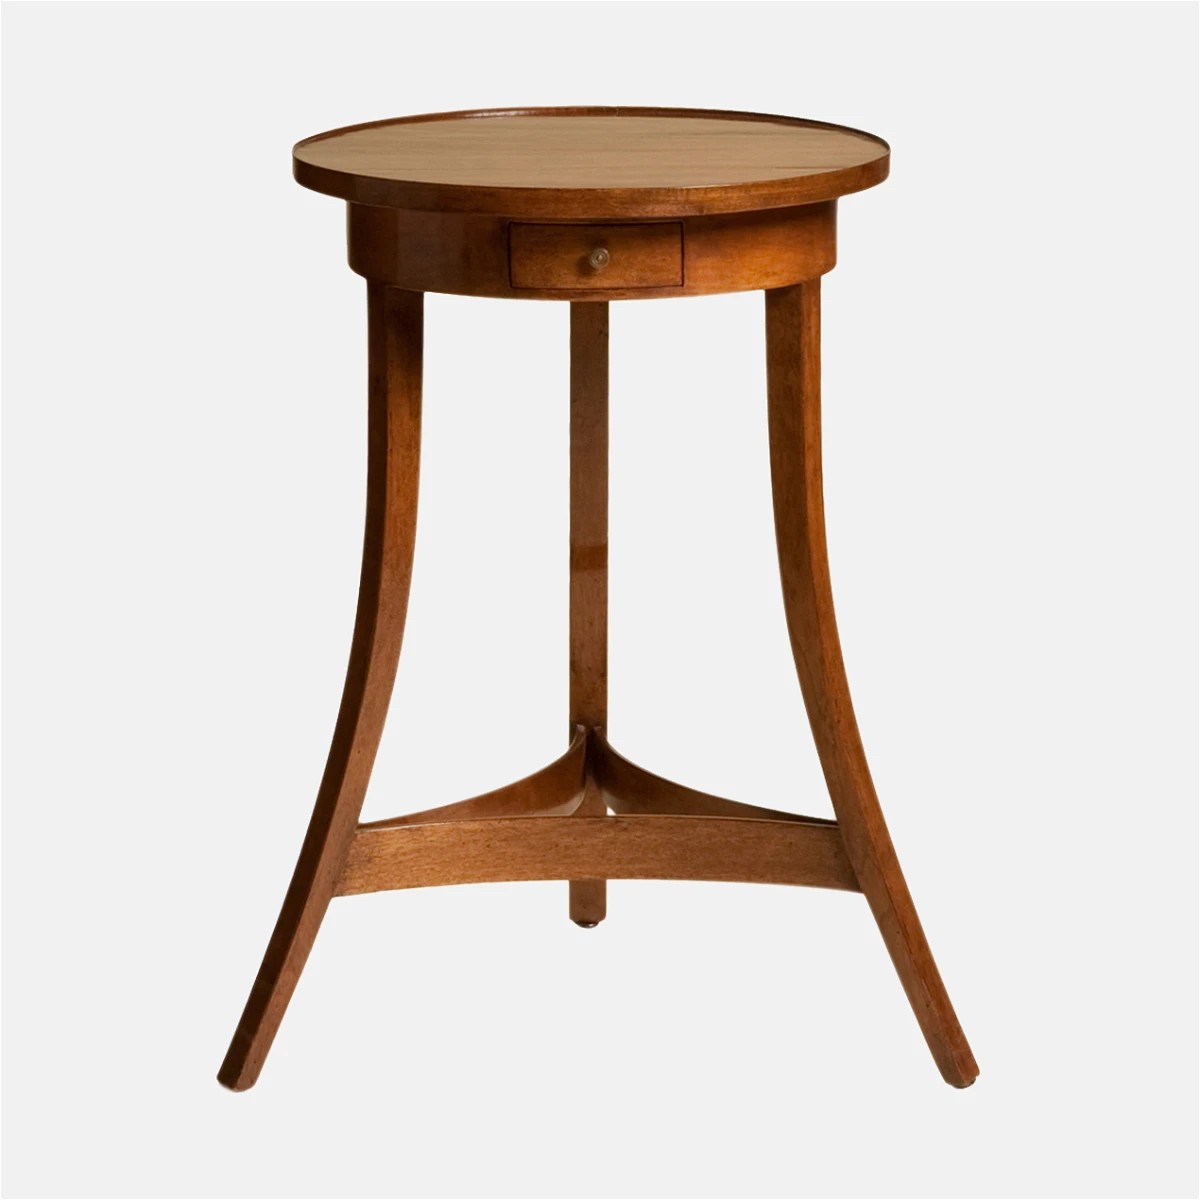 The image of an Bowood Table product